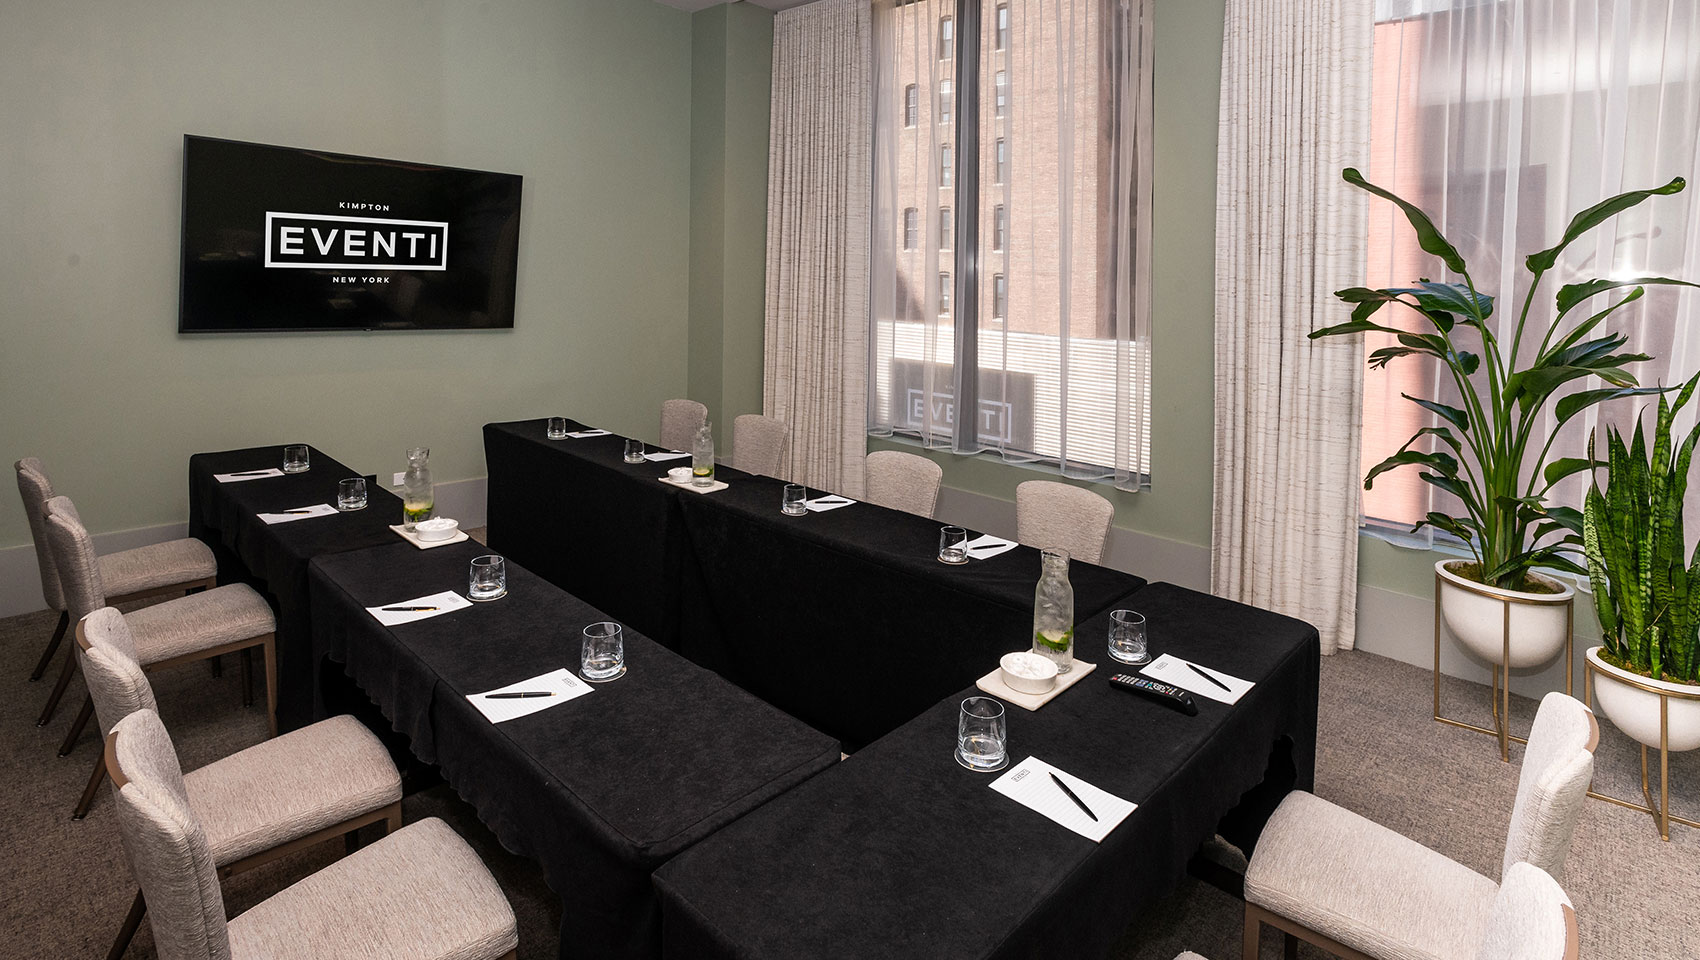 Invent II boardroom meeting with drawn curtains and meeting table with notepads, floral pieces, and glasses on table